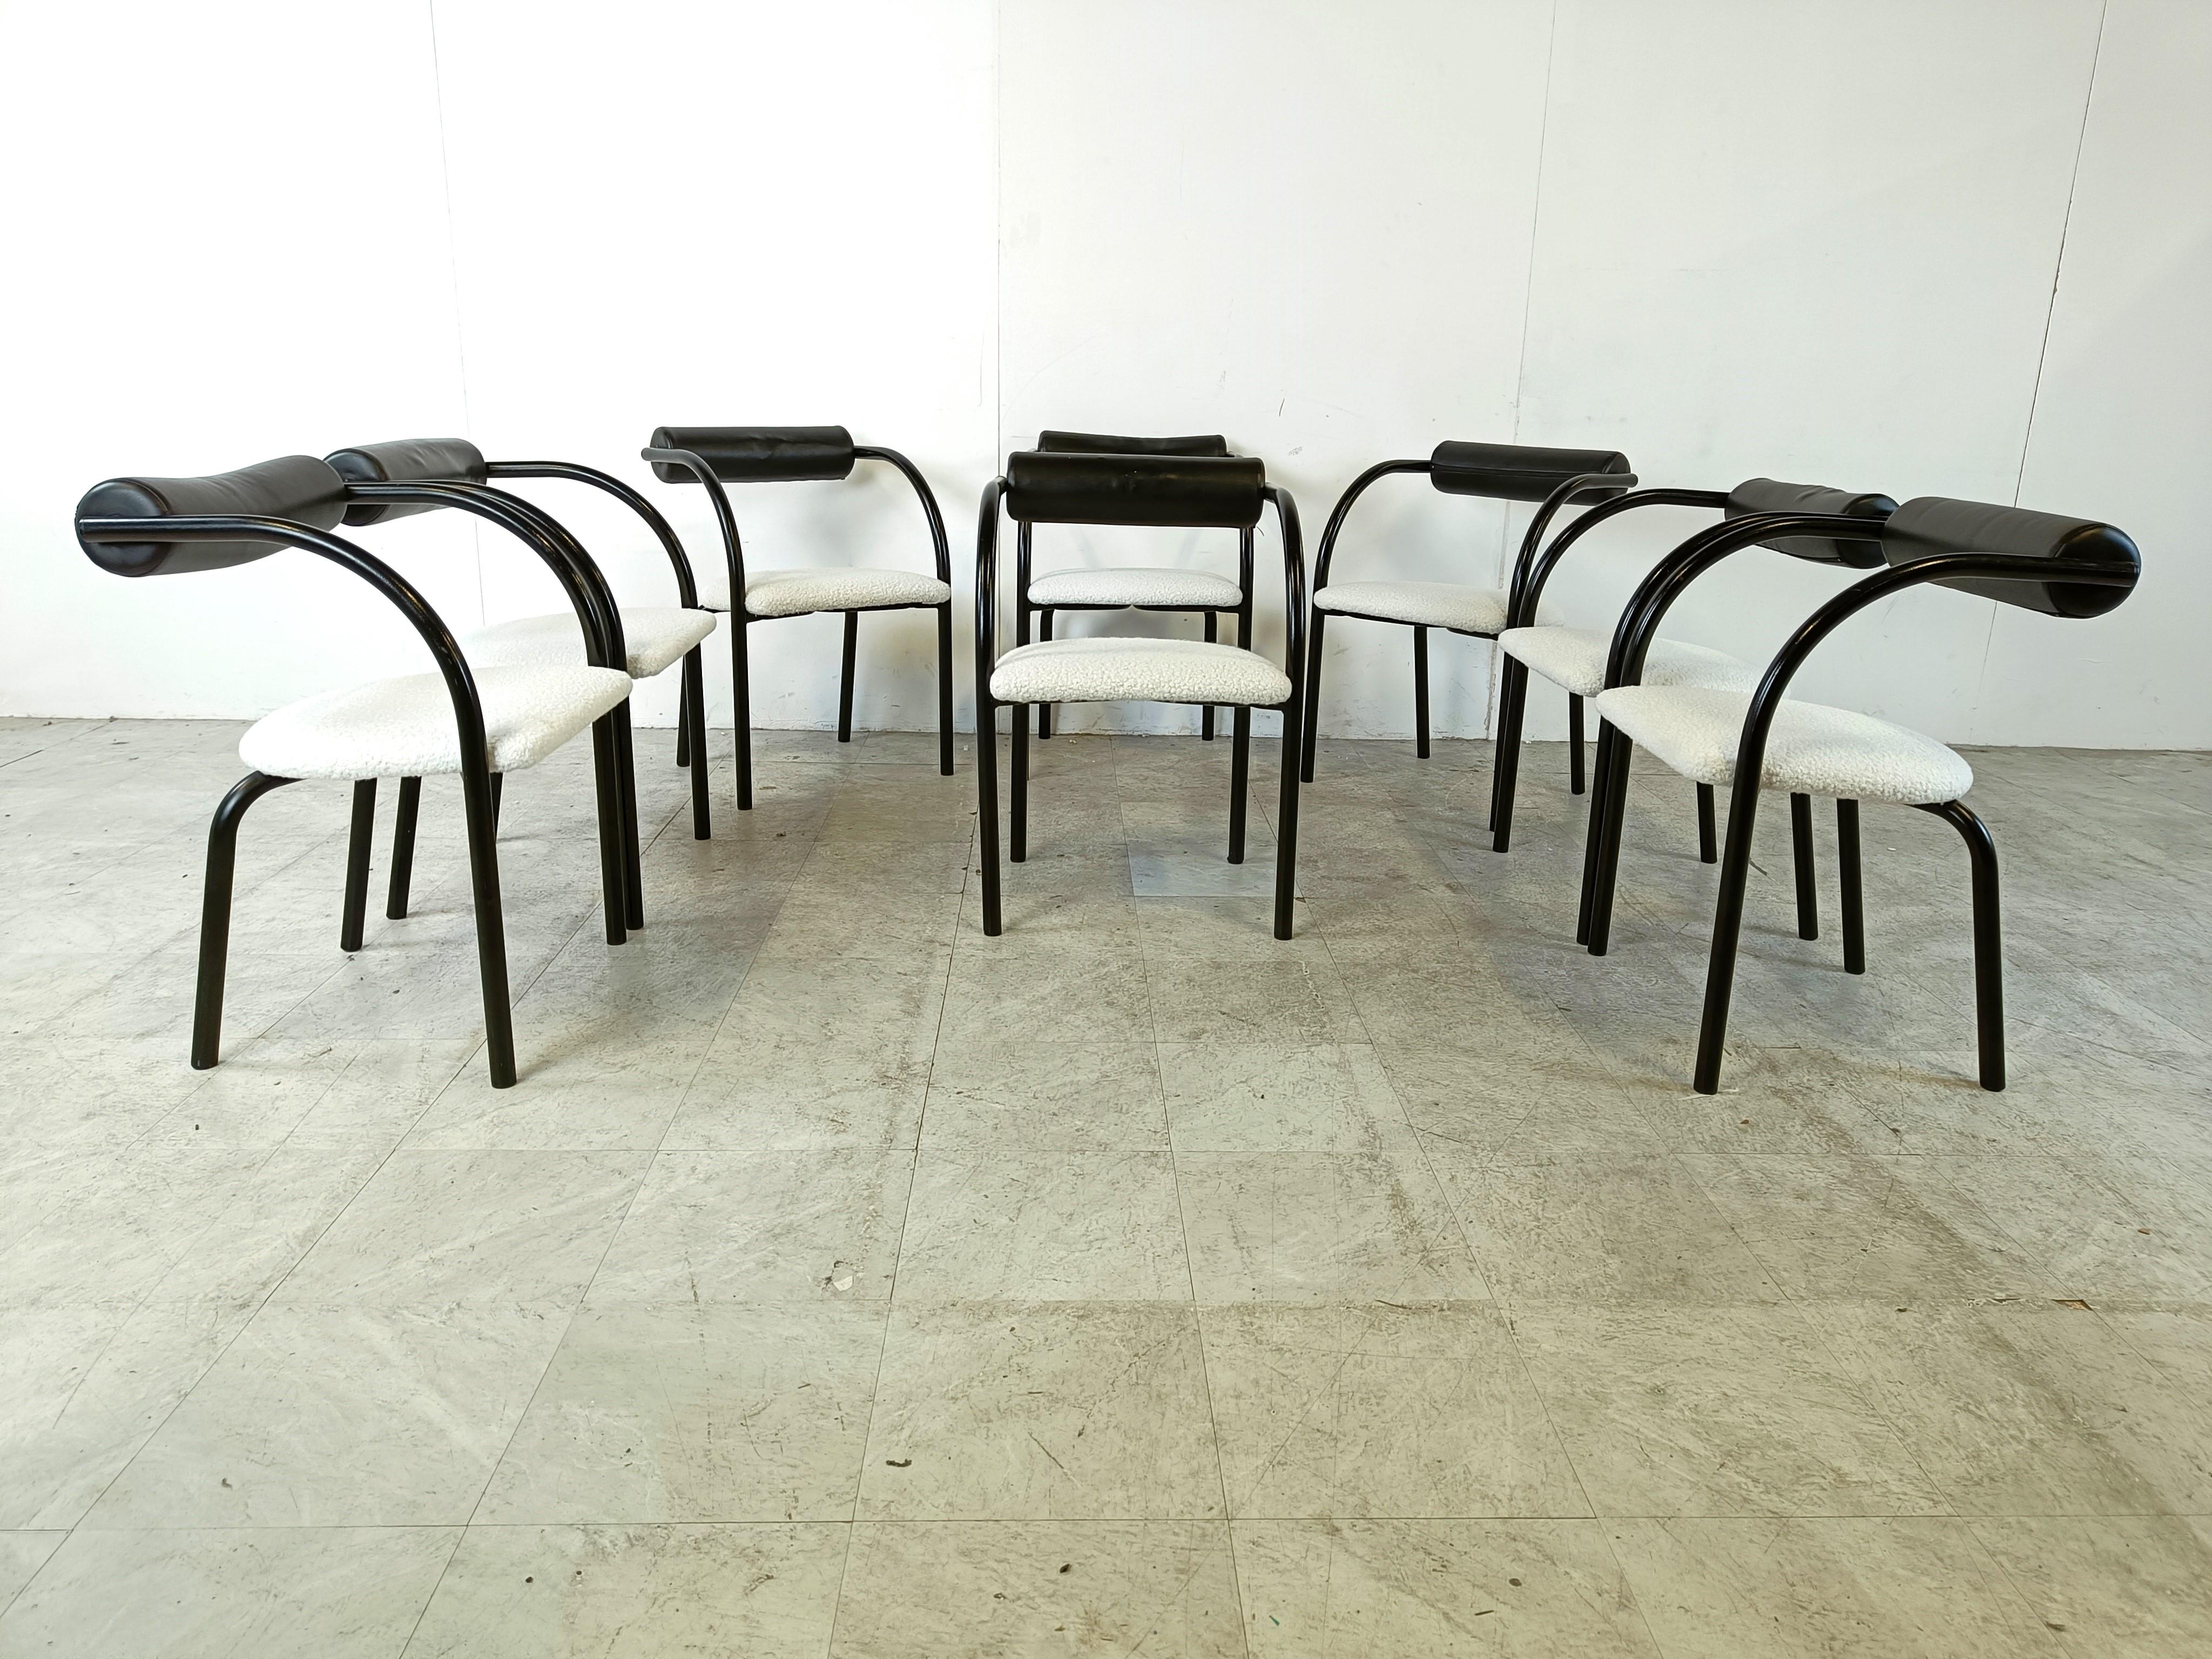 Post modern dining chairs with black lacquered metal tubular frames, black leather cushion  on the backrest and white bouclé fabric seats.

The black and white look makes the chairs stand out. 

Attractive, timeless design 

Good condition

1980s -